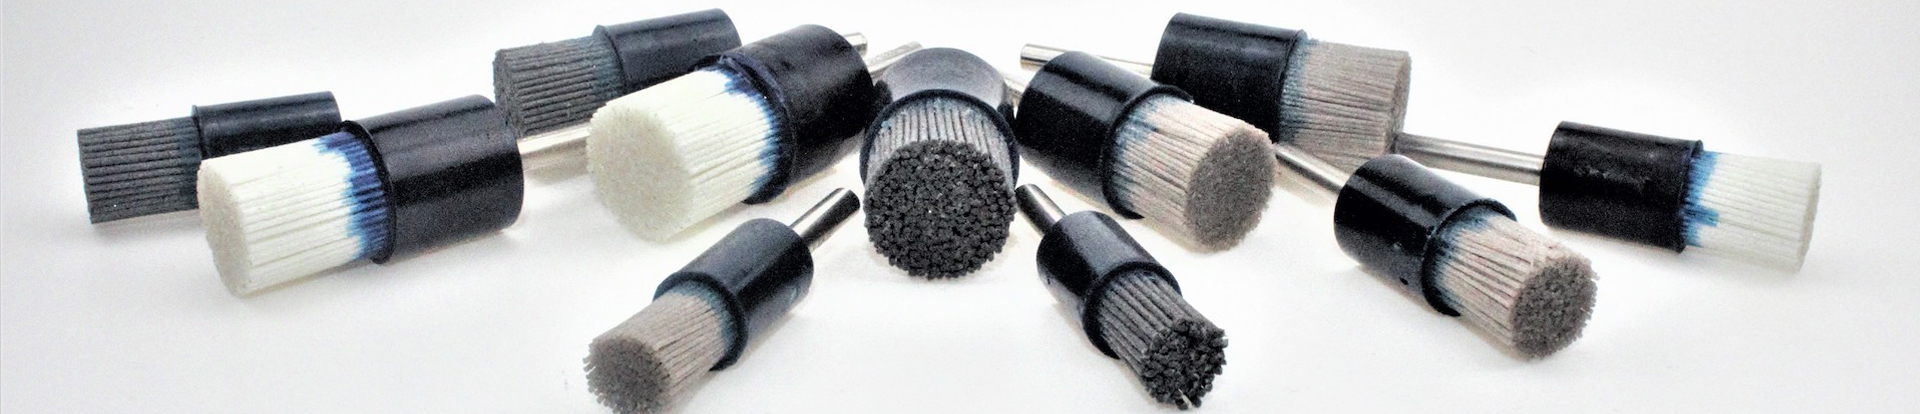 The Composition of Nylon Strip Brush and Its Maintenance Skills